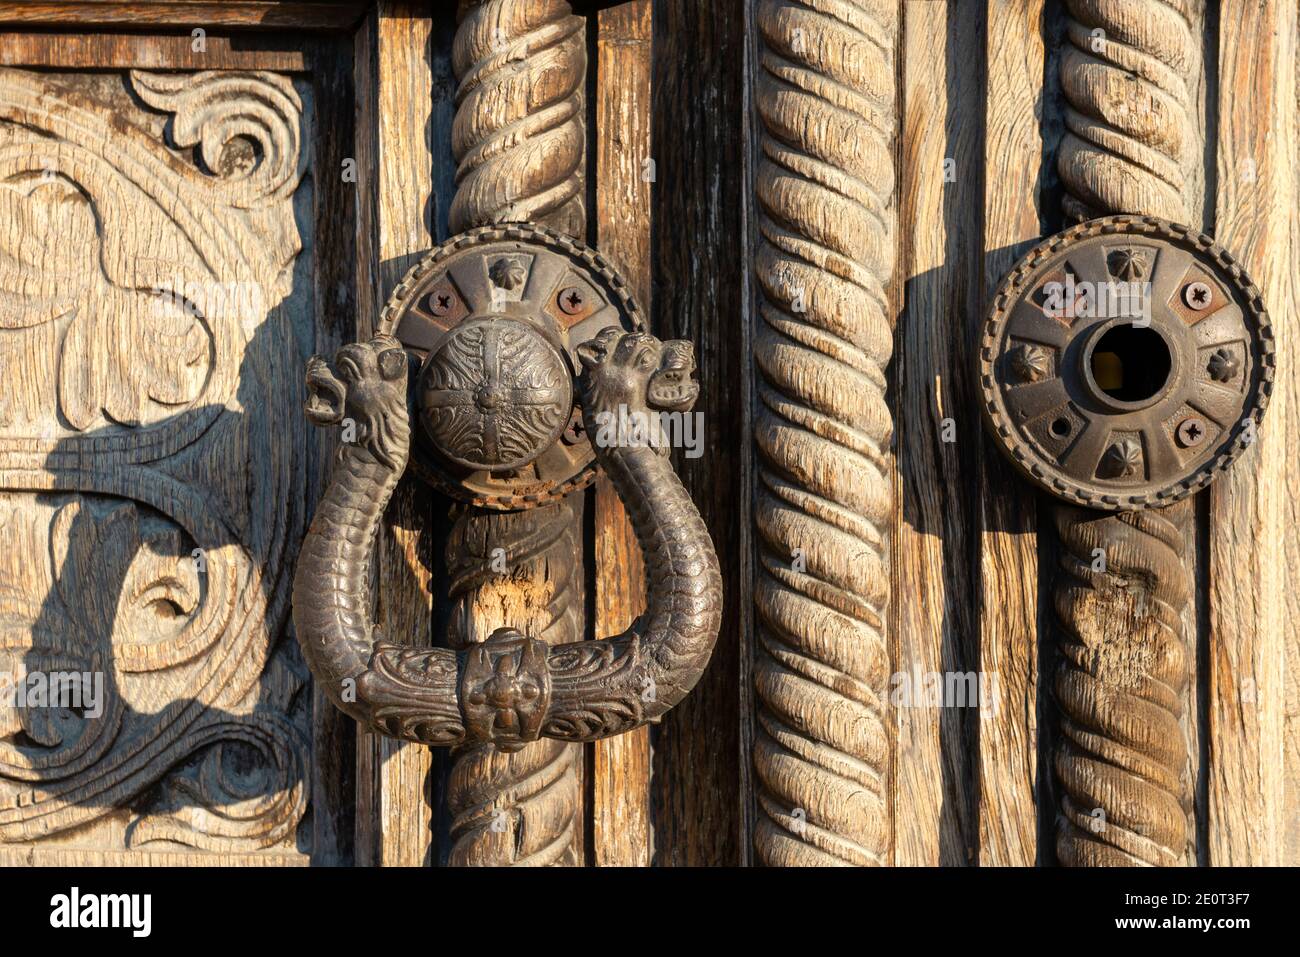 Ornamental door handle on old carved wood panel door knocker detail of the historic St. Alexander Nevsky Orthodox Cathedral church in Sofia Bulgaria Stock Photo